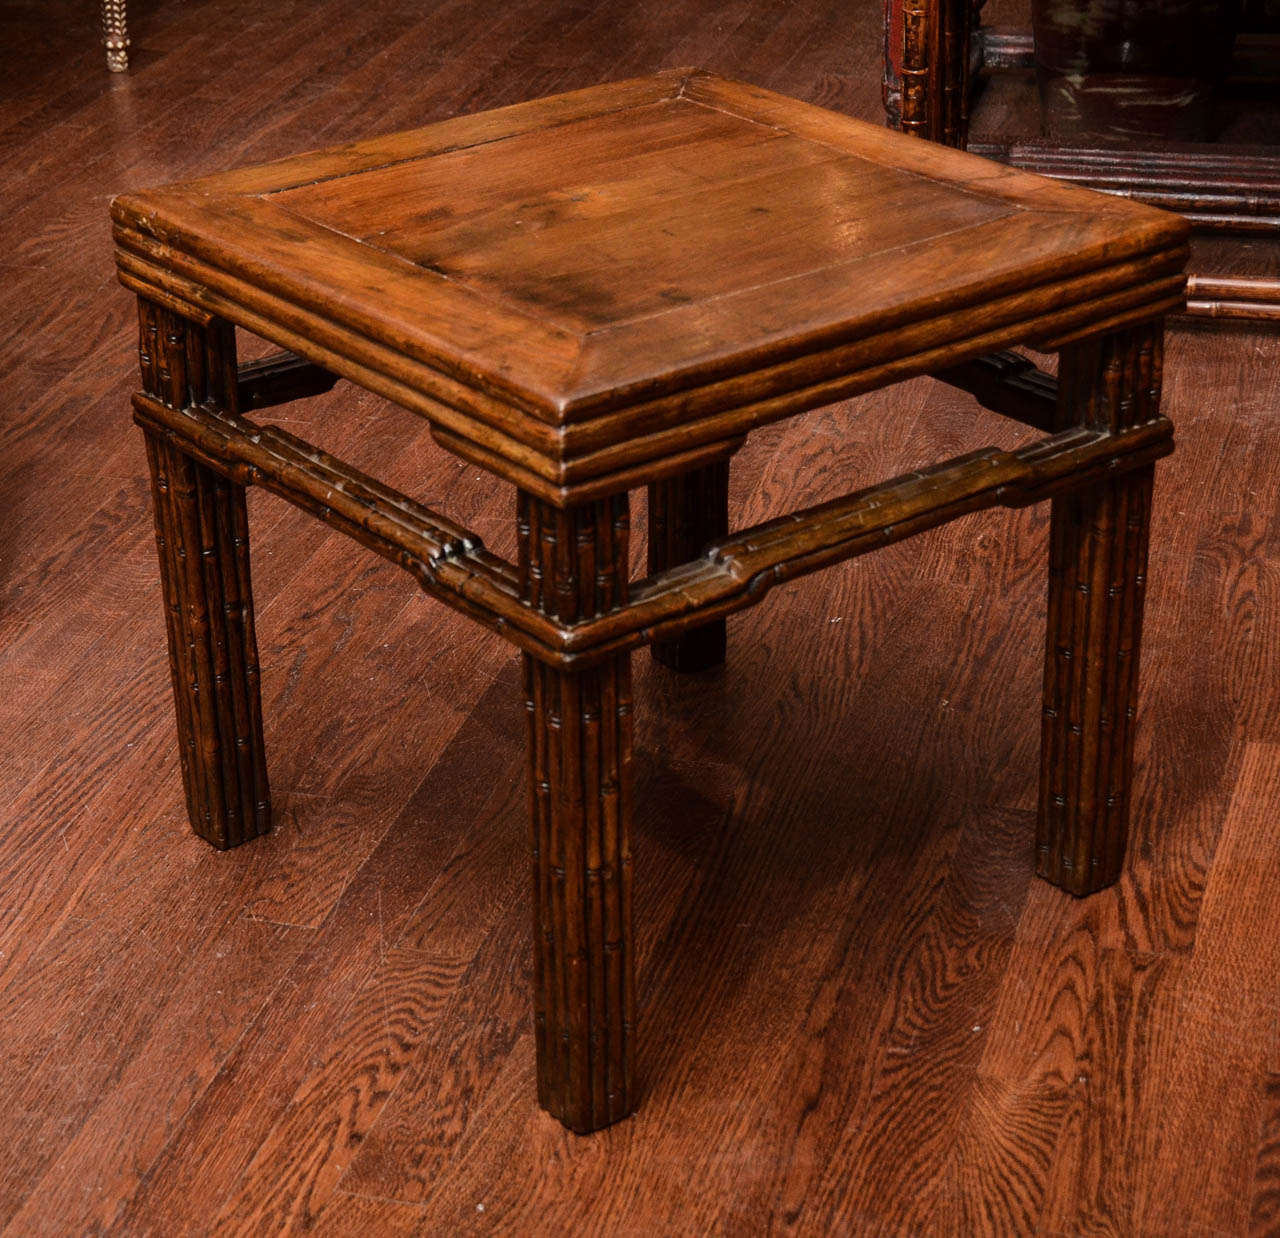 Turn of the century Qing dynasty faux bamboo carved stool with reeded decoration.